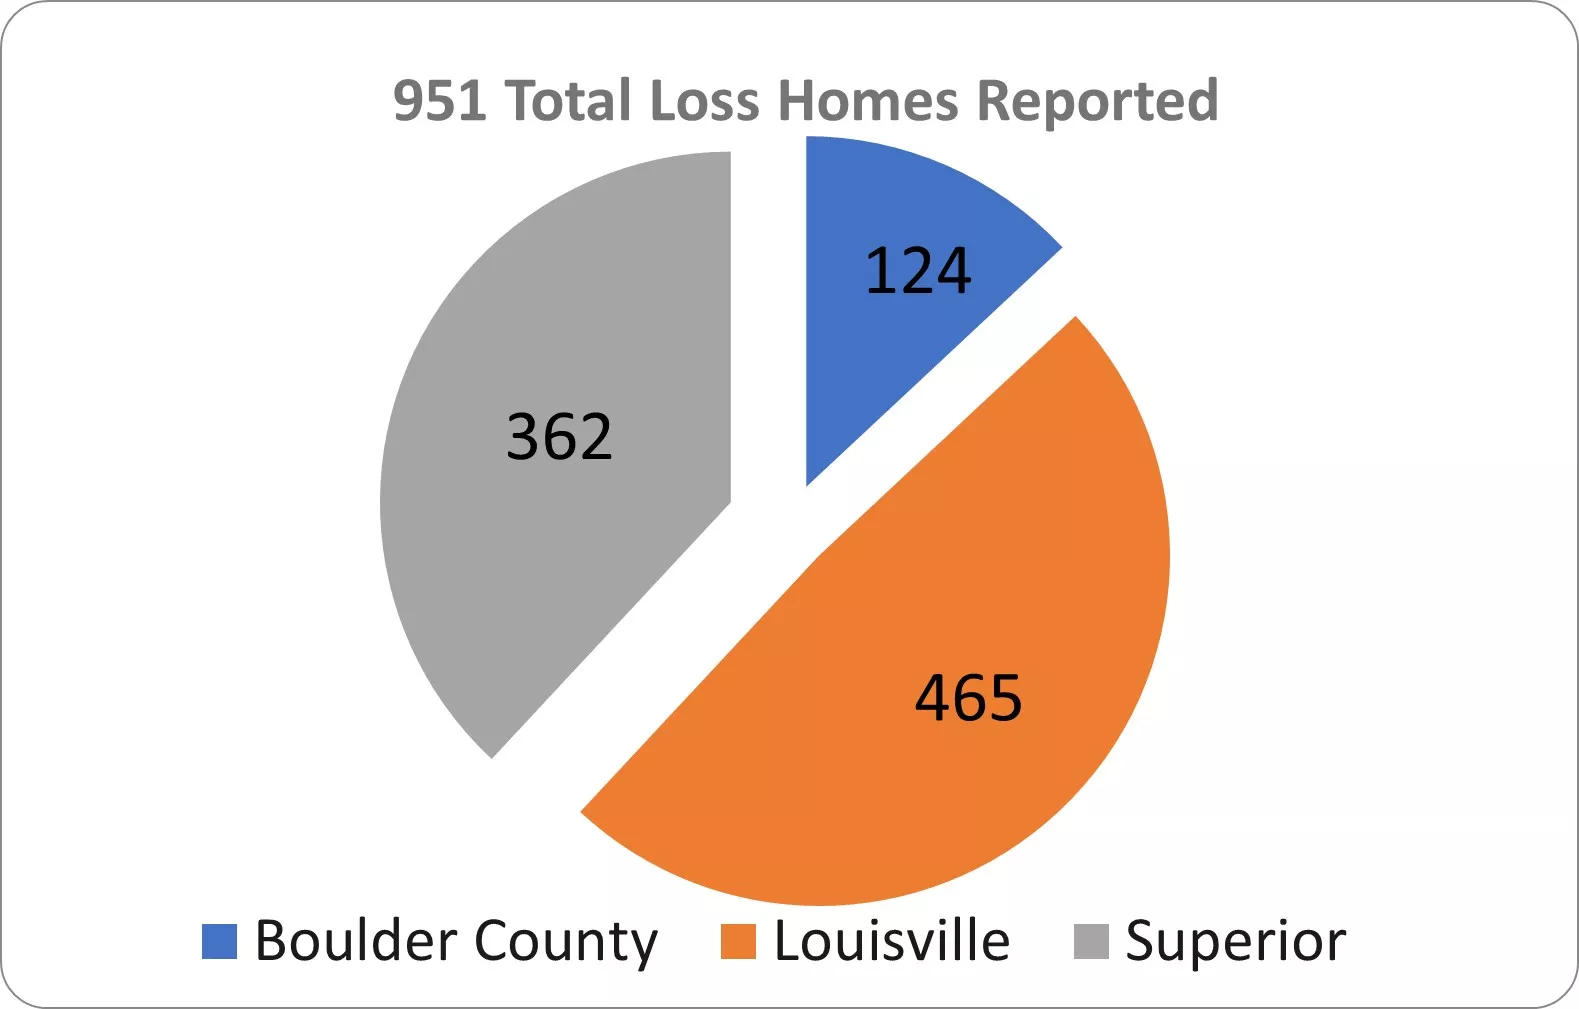 Number of Total Loss Homes in Marshall Fire: 951, with 465 in Louisville, 362 in Superior and 124 in unincorporated Boulder County.